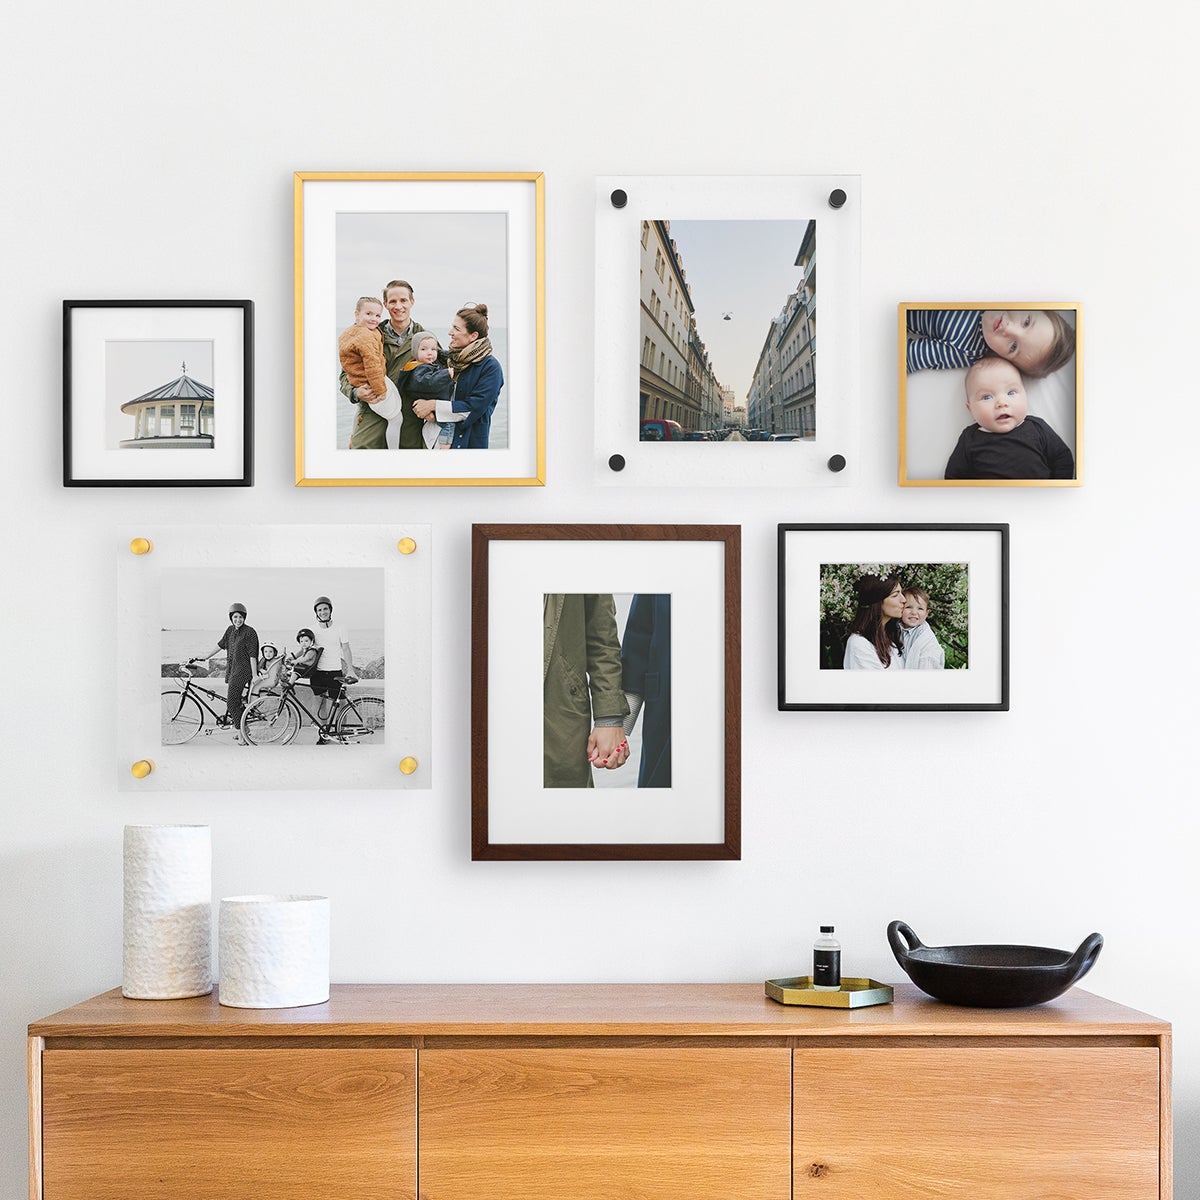 Gallery wall created a variety of frame styles